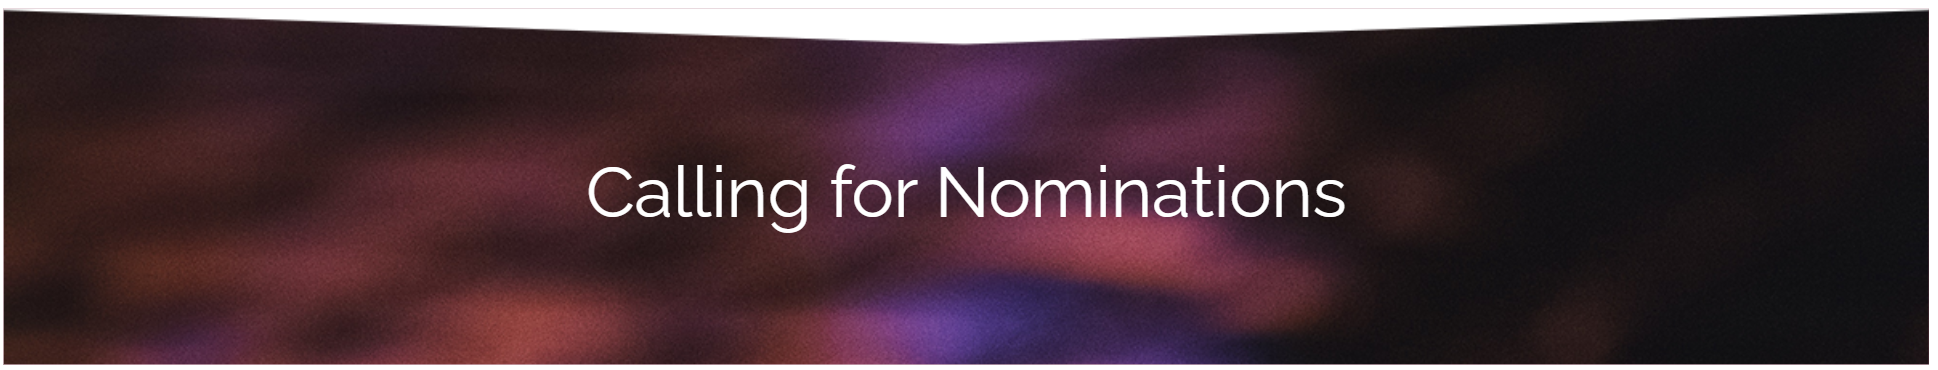 Call for nominations banner